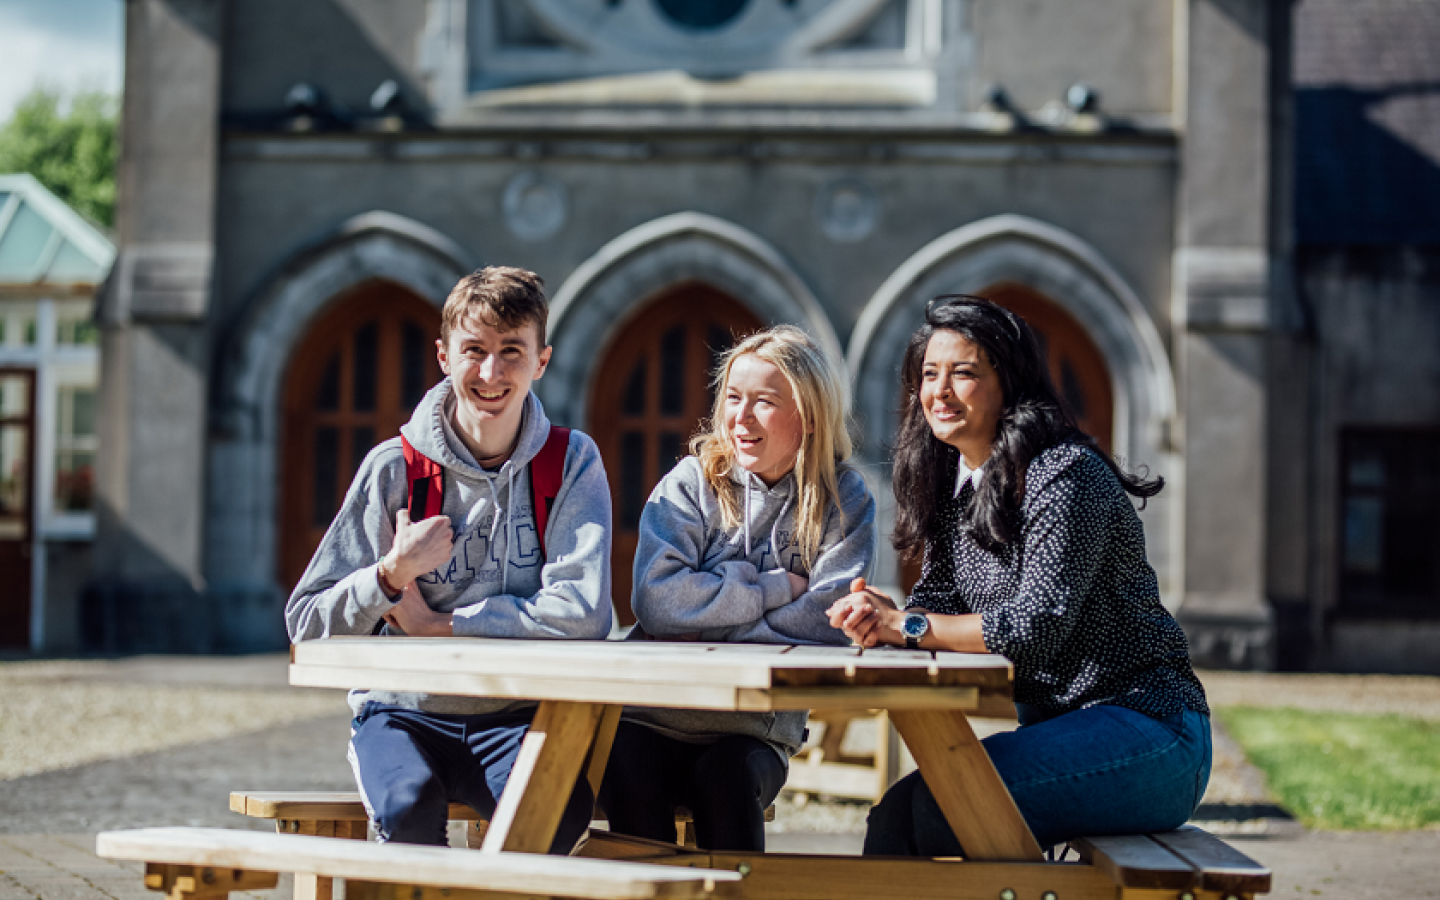 One male and two female students are pictured sitting at a wooden picnic table